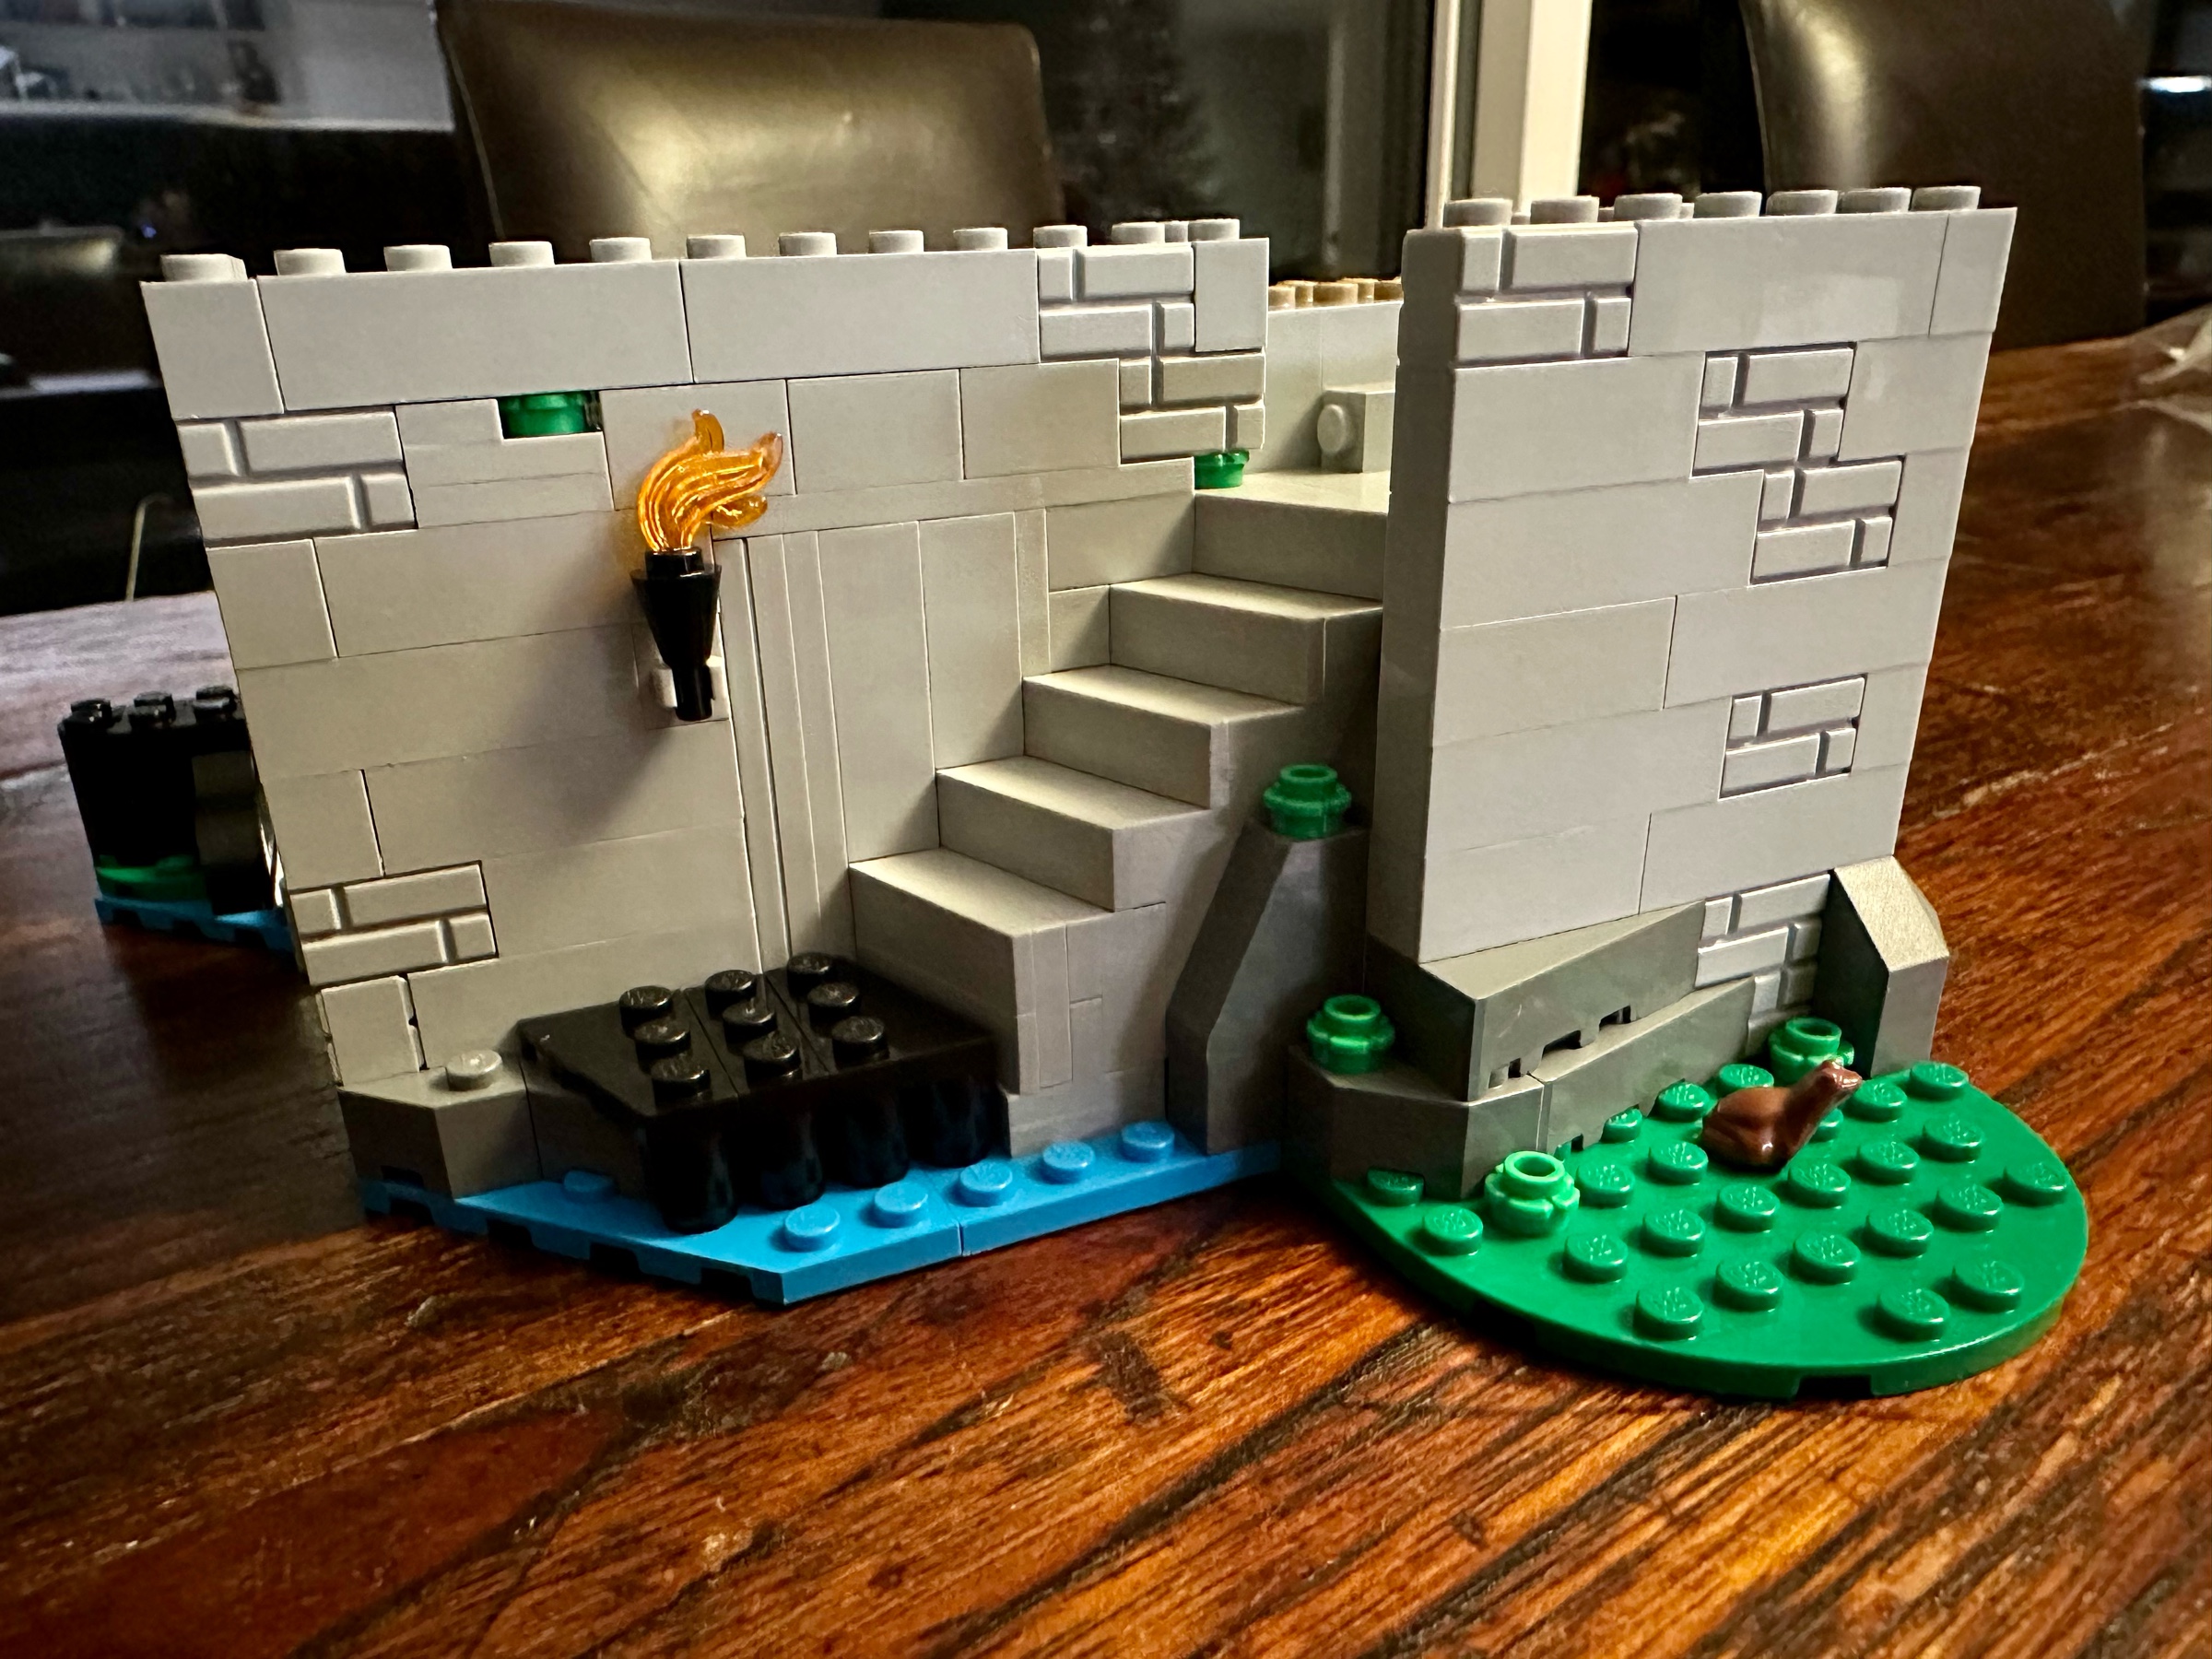 Exterior view of LEGO castle with a staircase leading up from a small dock. The castle wall by the stairs bears a flaming torch. A brown frog sits on the grass nearby.